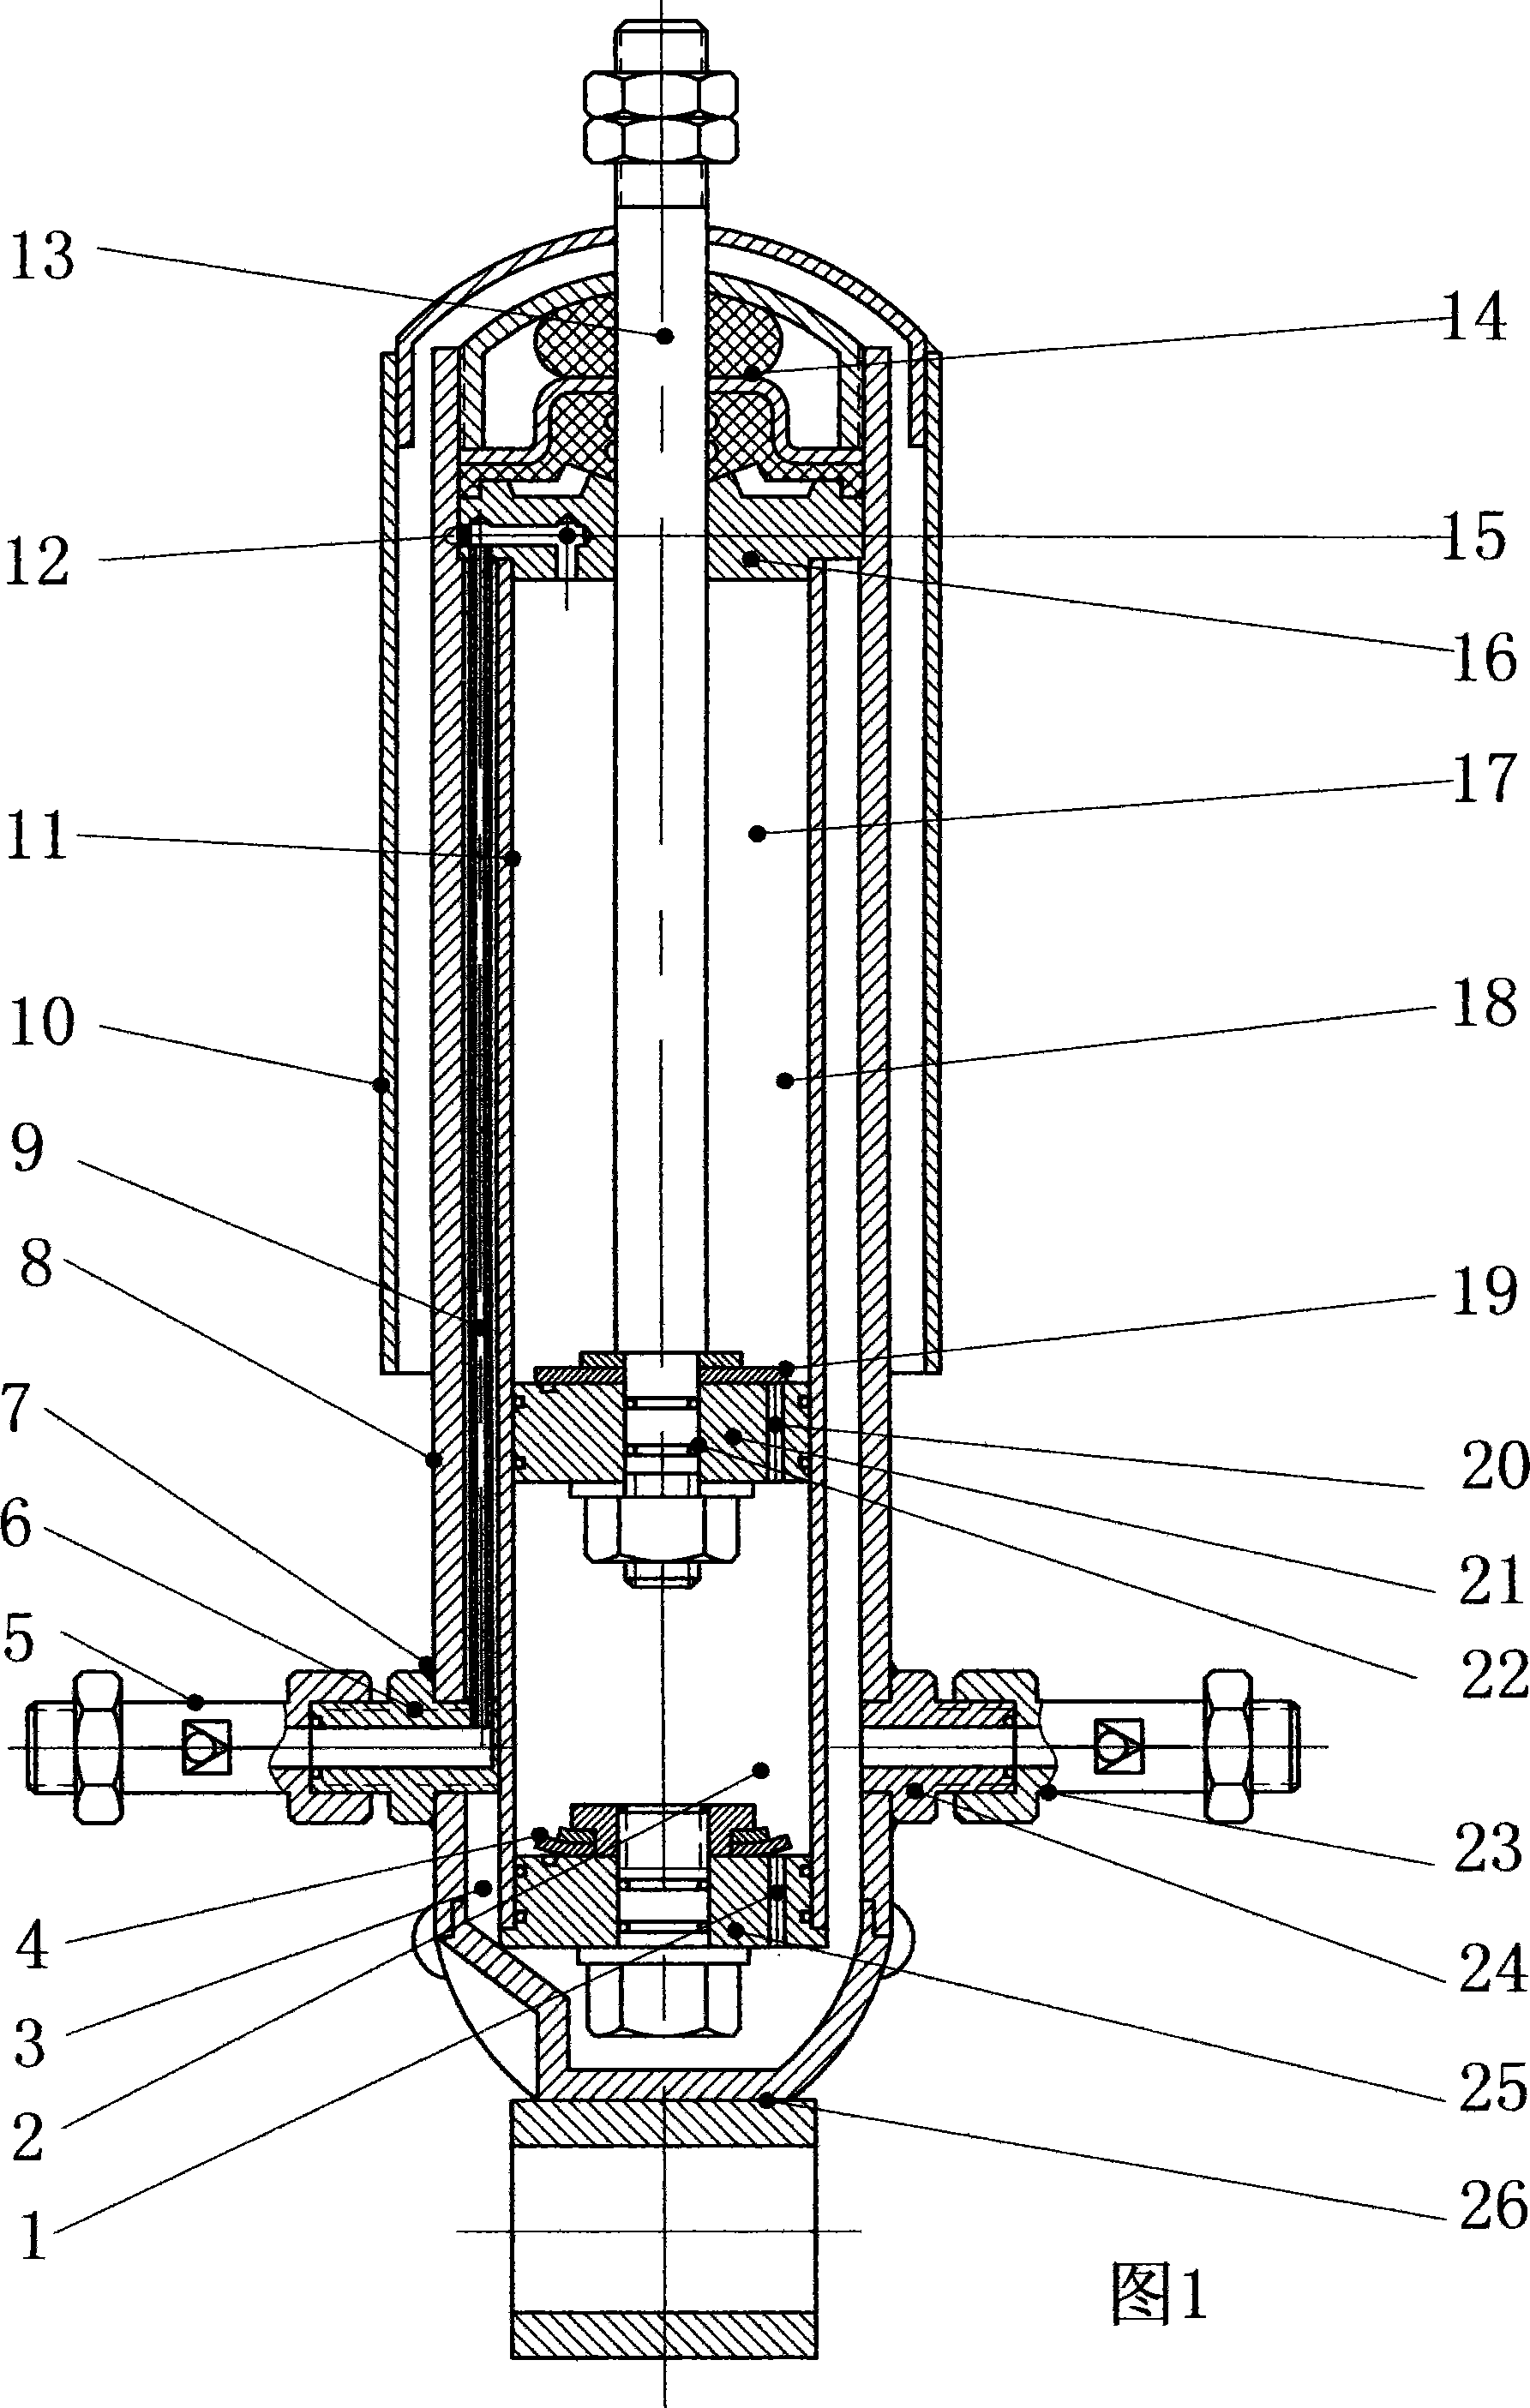 Reducer for absorbing vibration energy refrigeration